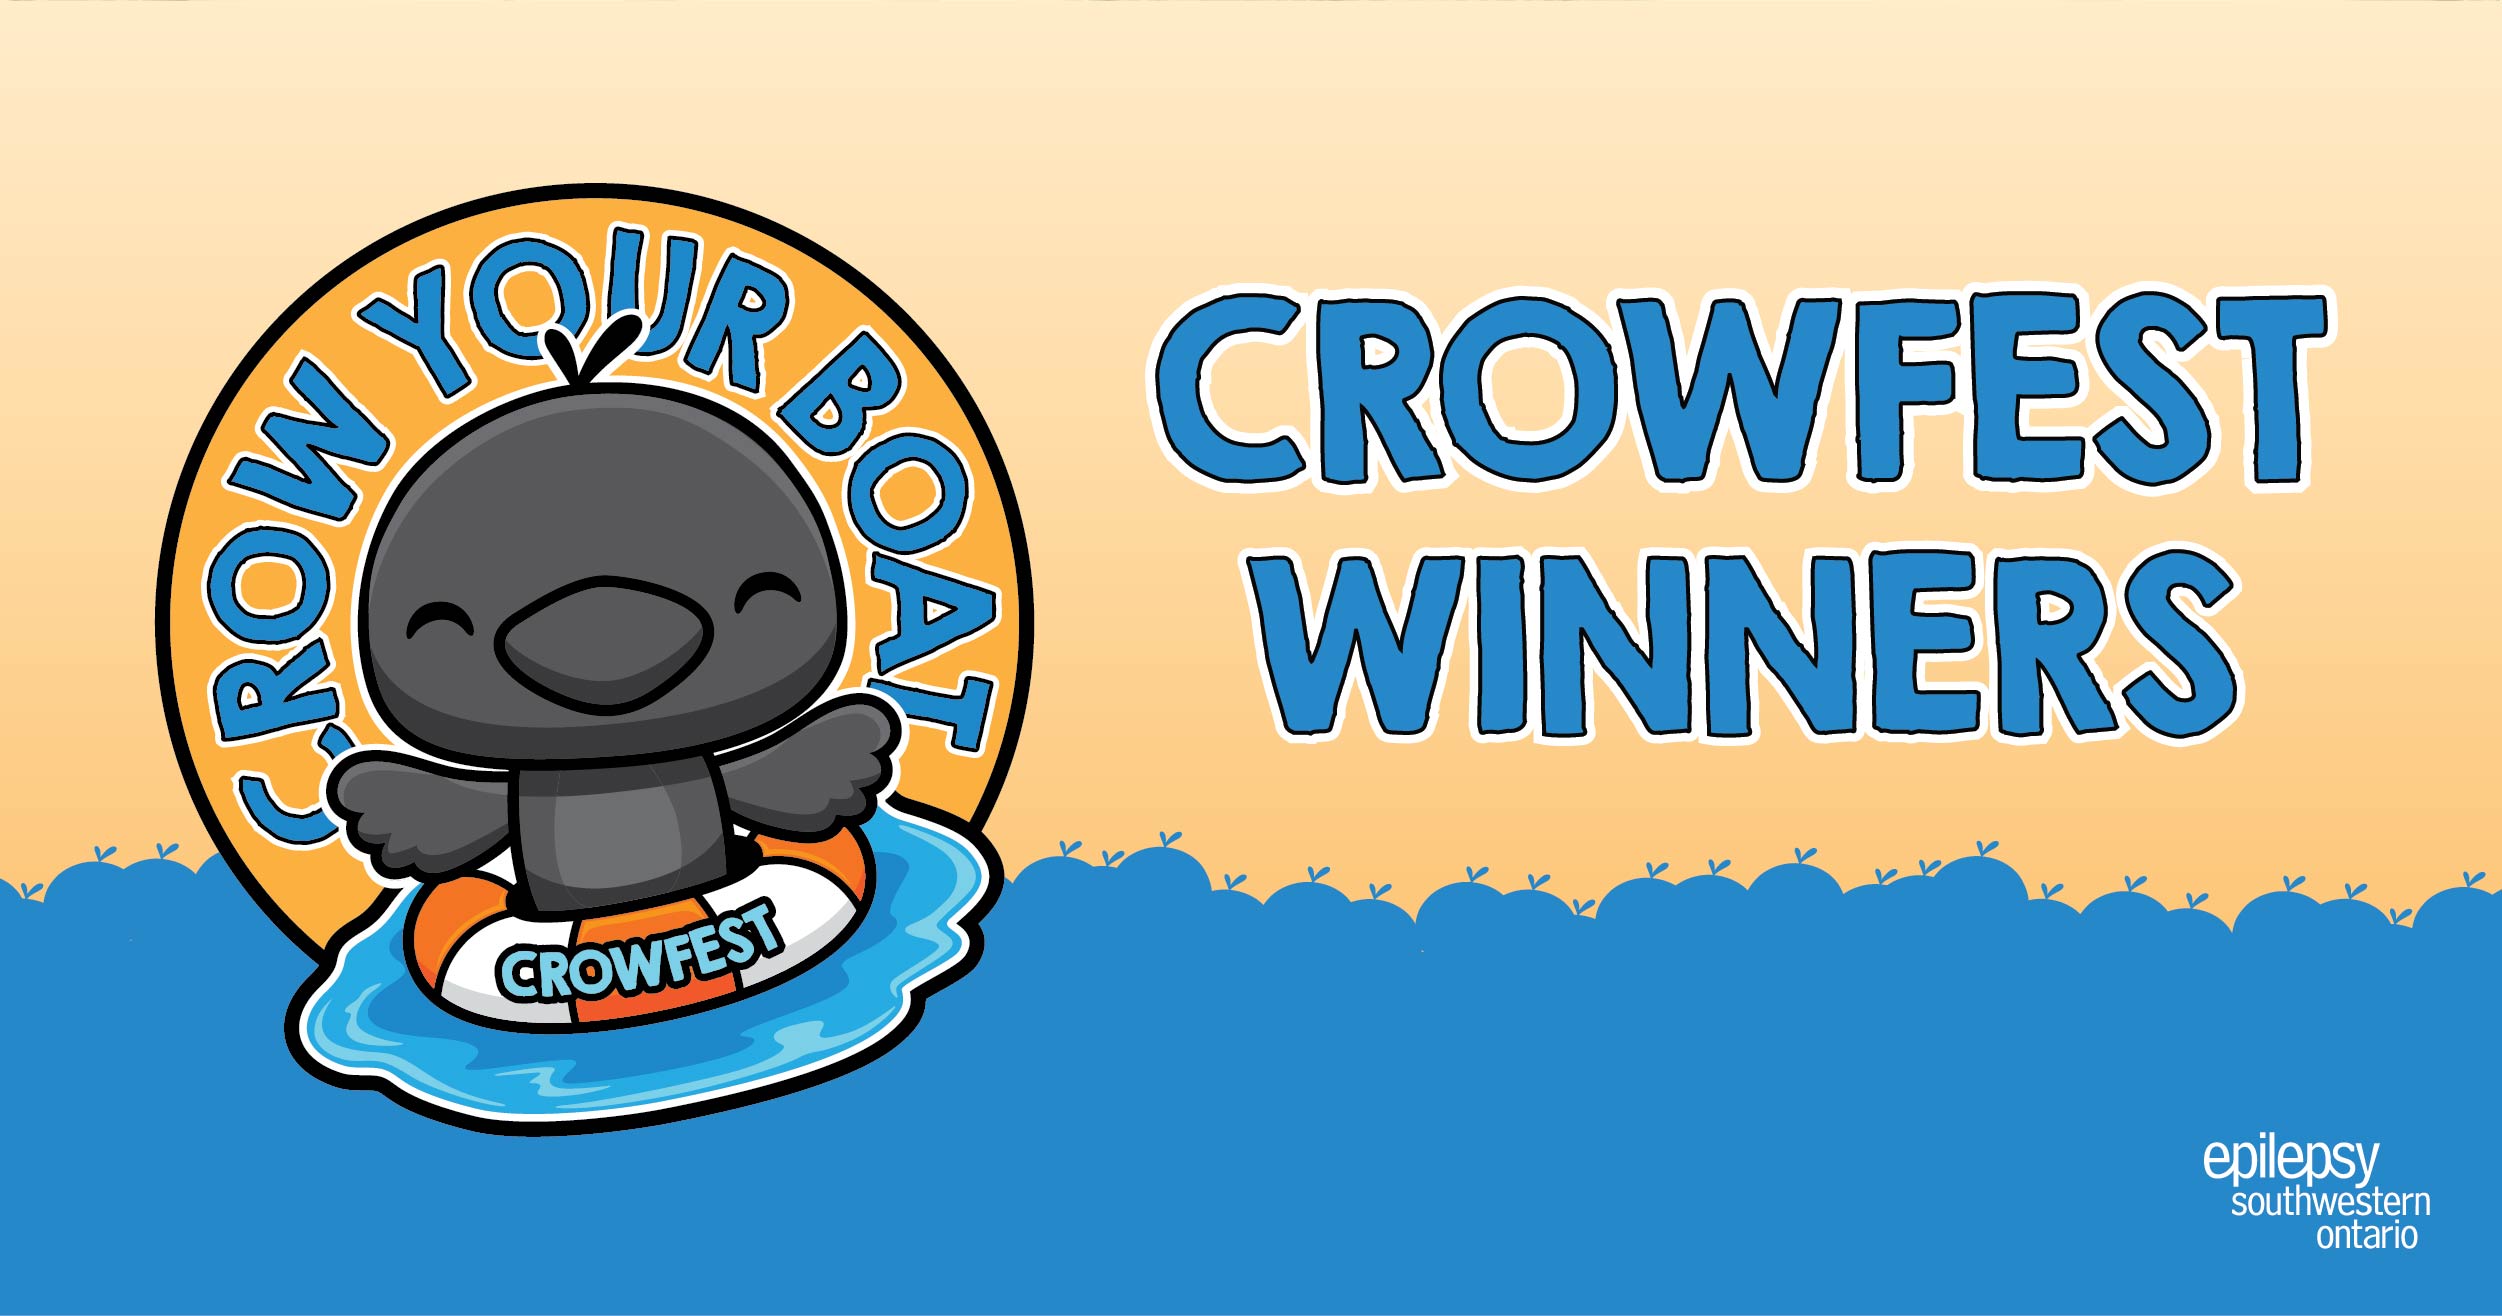 Cartoon crow floating on water - announcing crow your boat winners